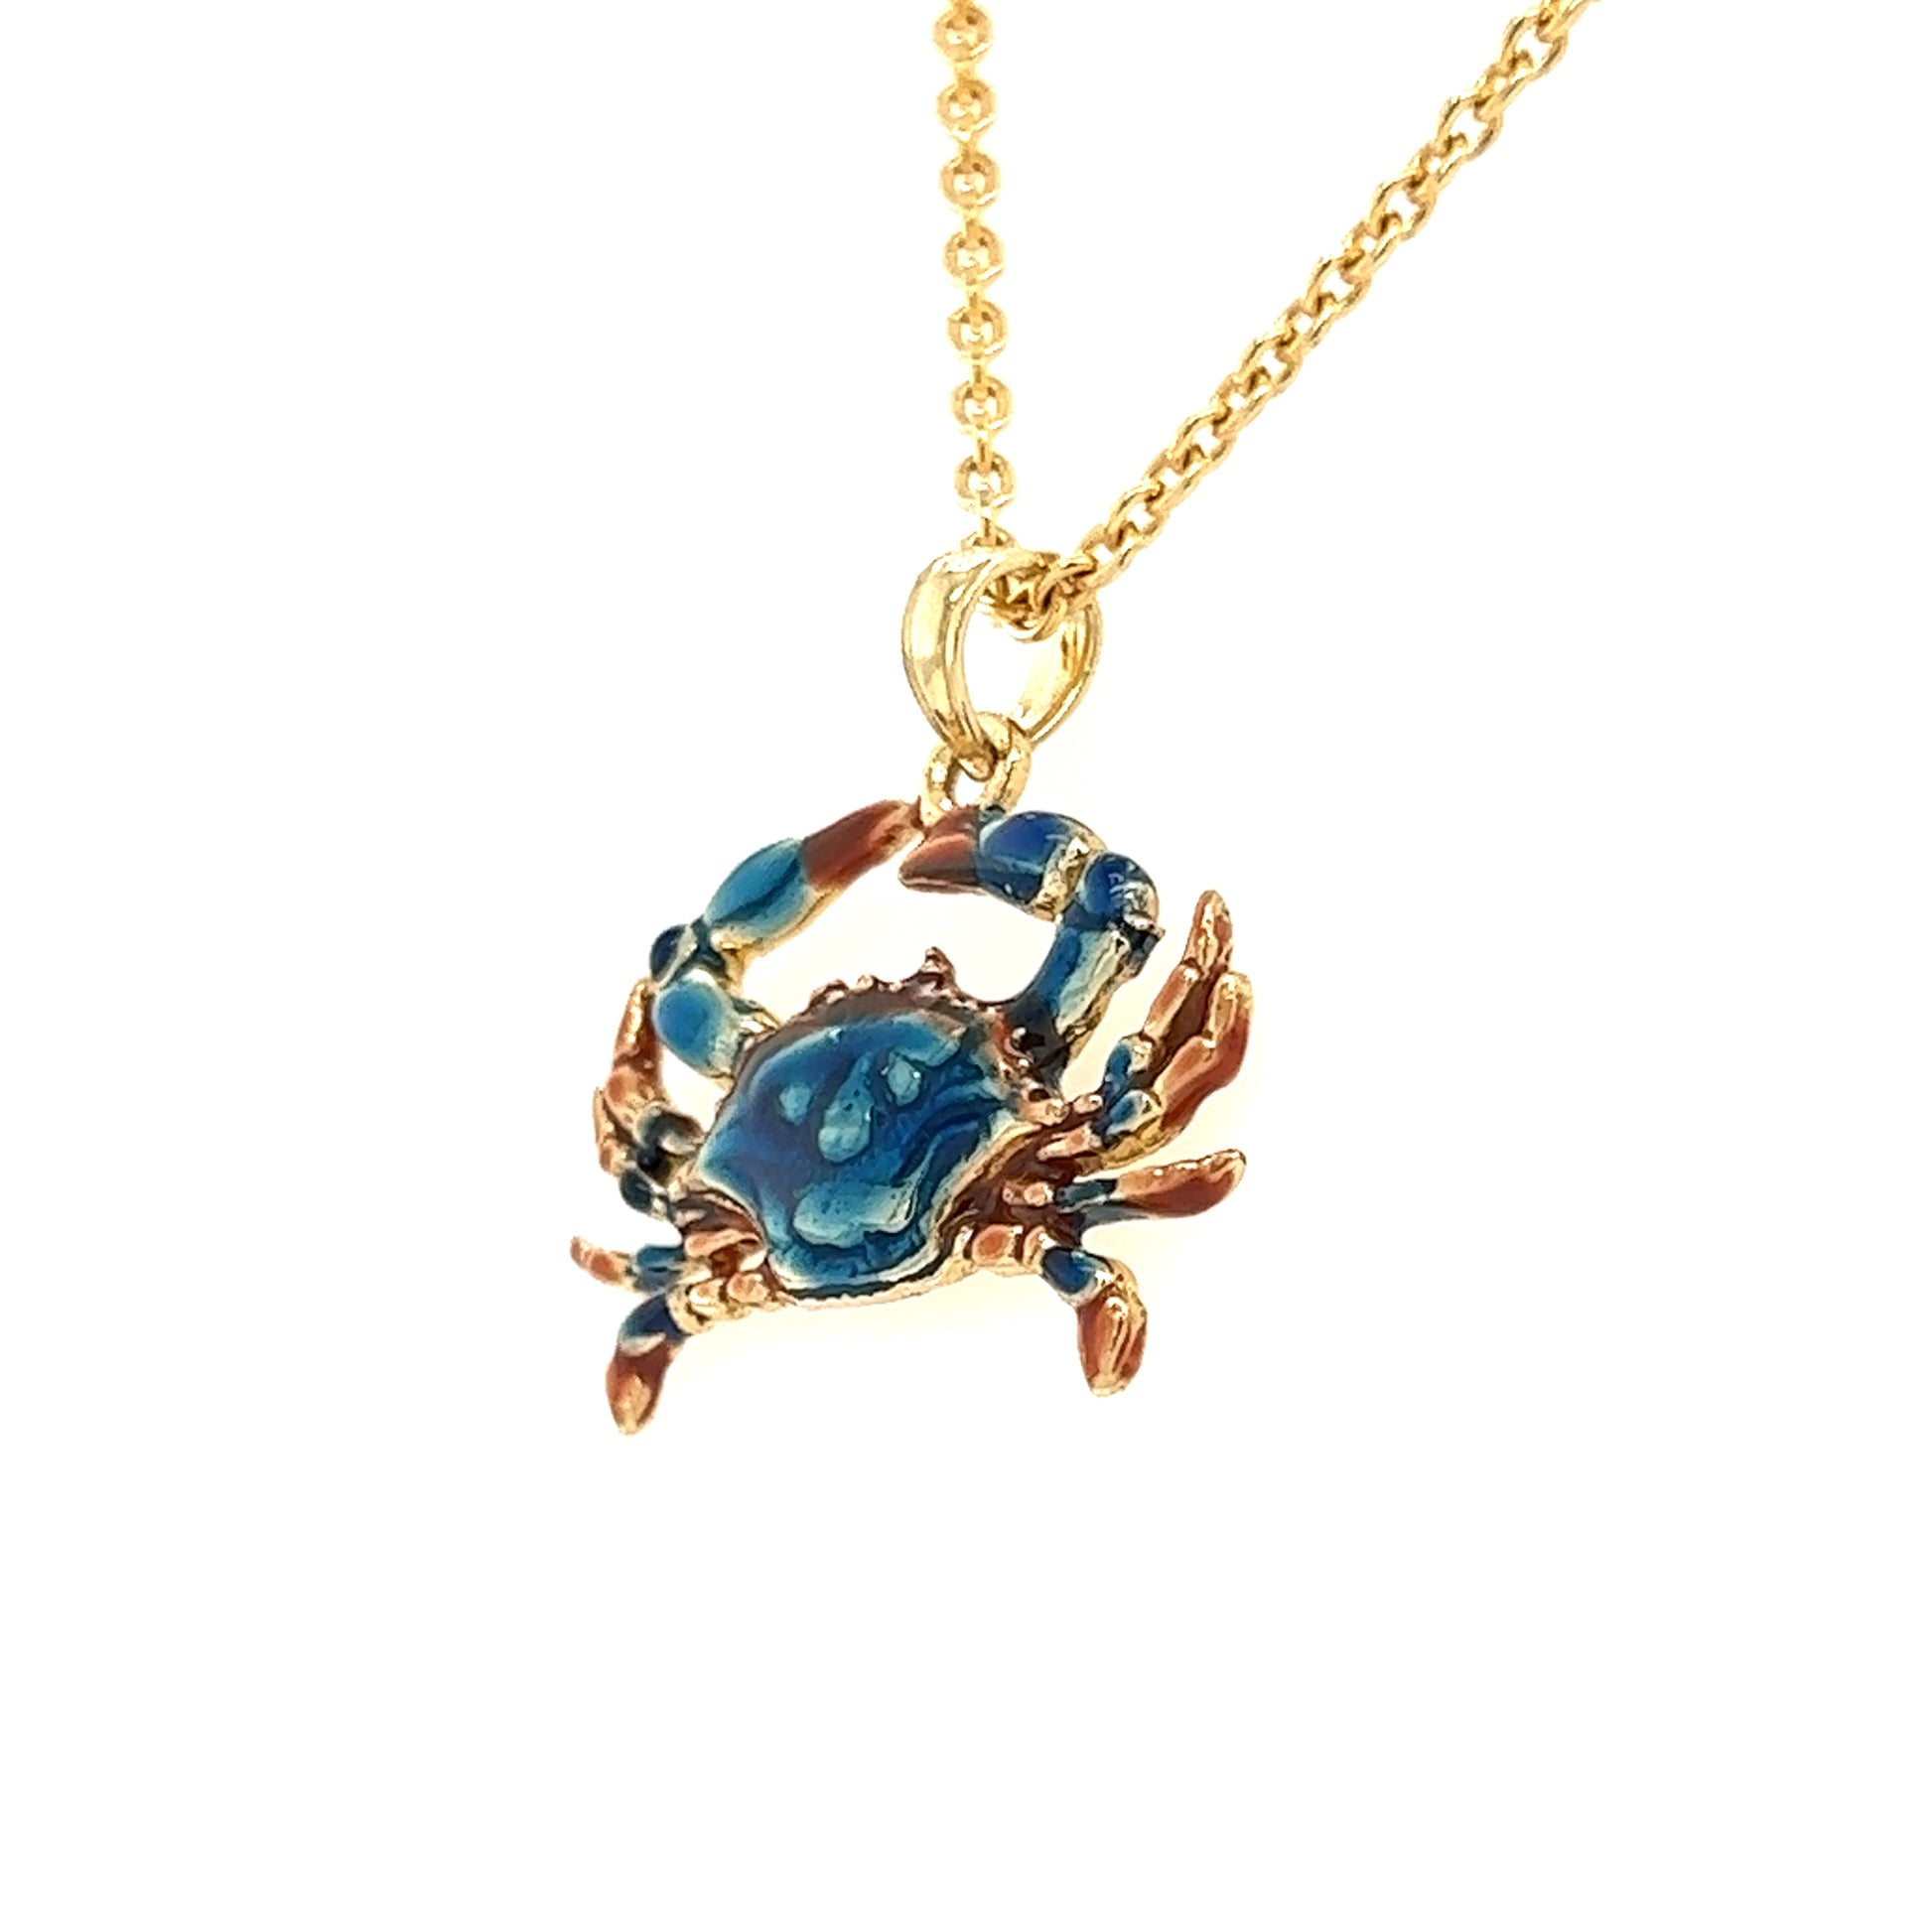 Blue Crab Small Pendant with Enamel in 14K Yellow Gold Pendant and Chain Right Side View